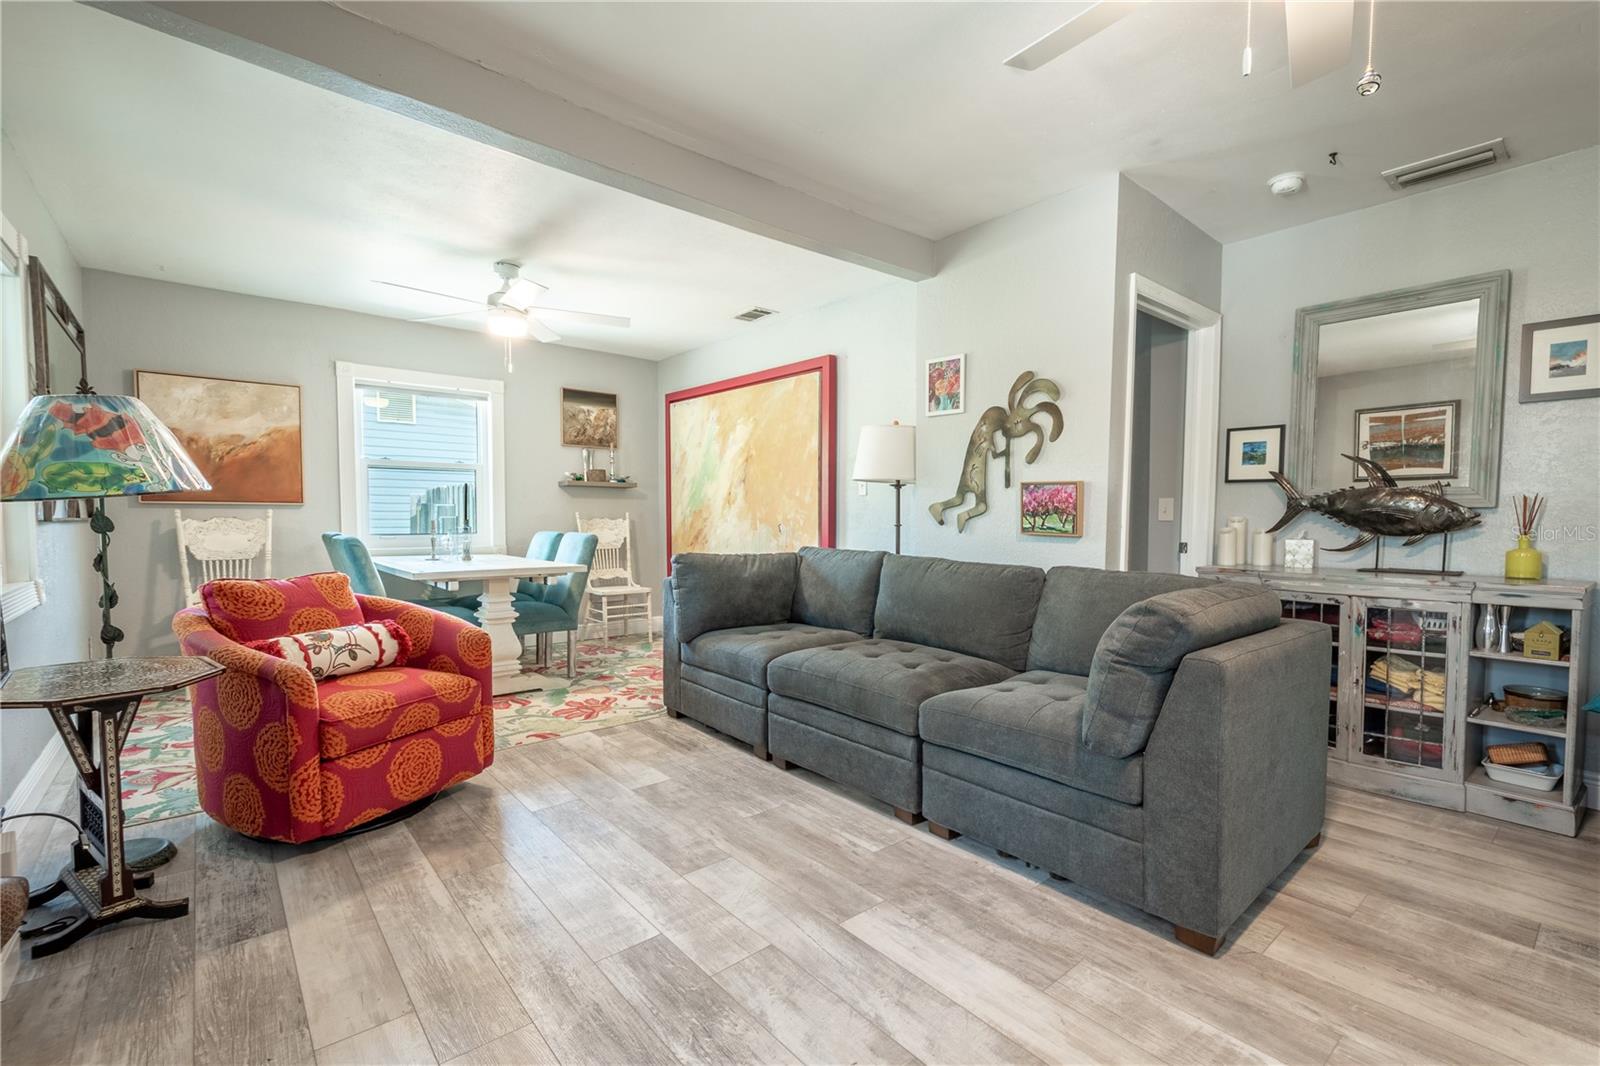 The living and dining rooms feature luxury vinyl floors and ceiling fans for year round comfort.